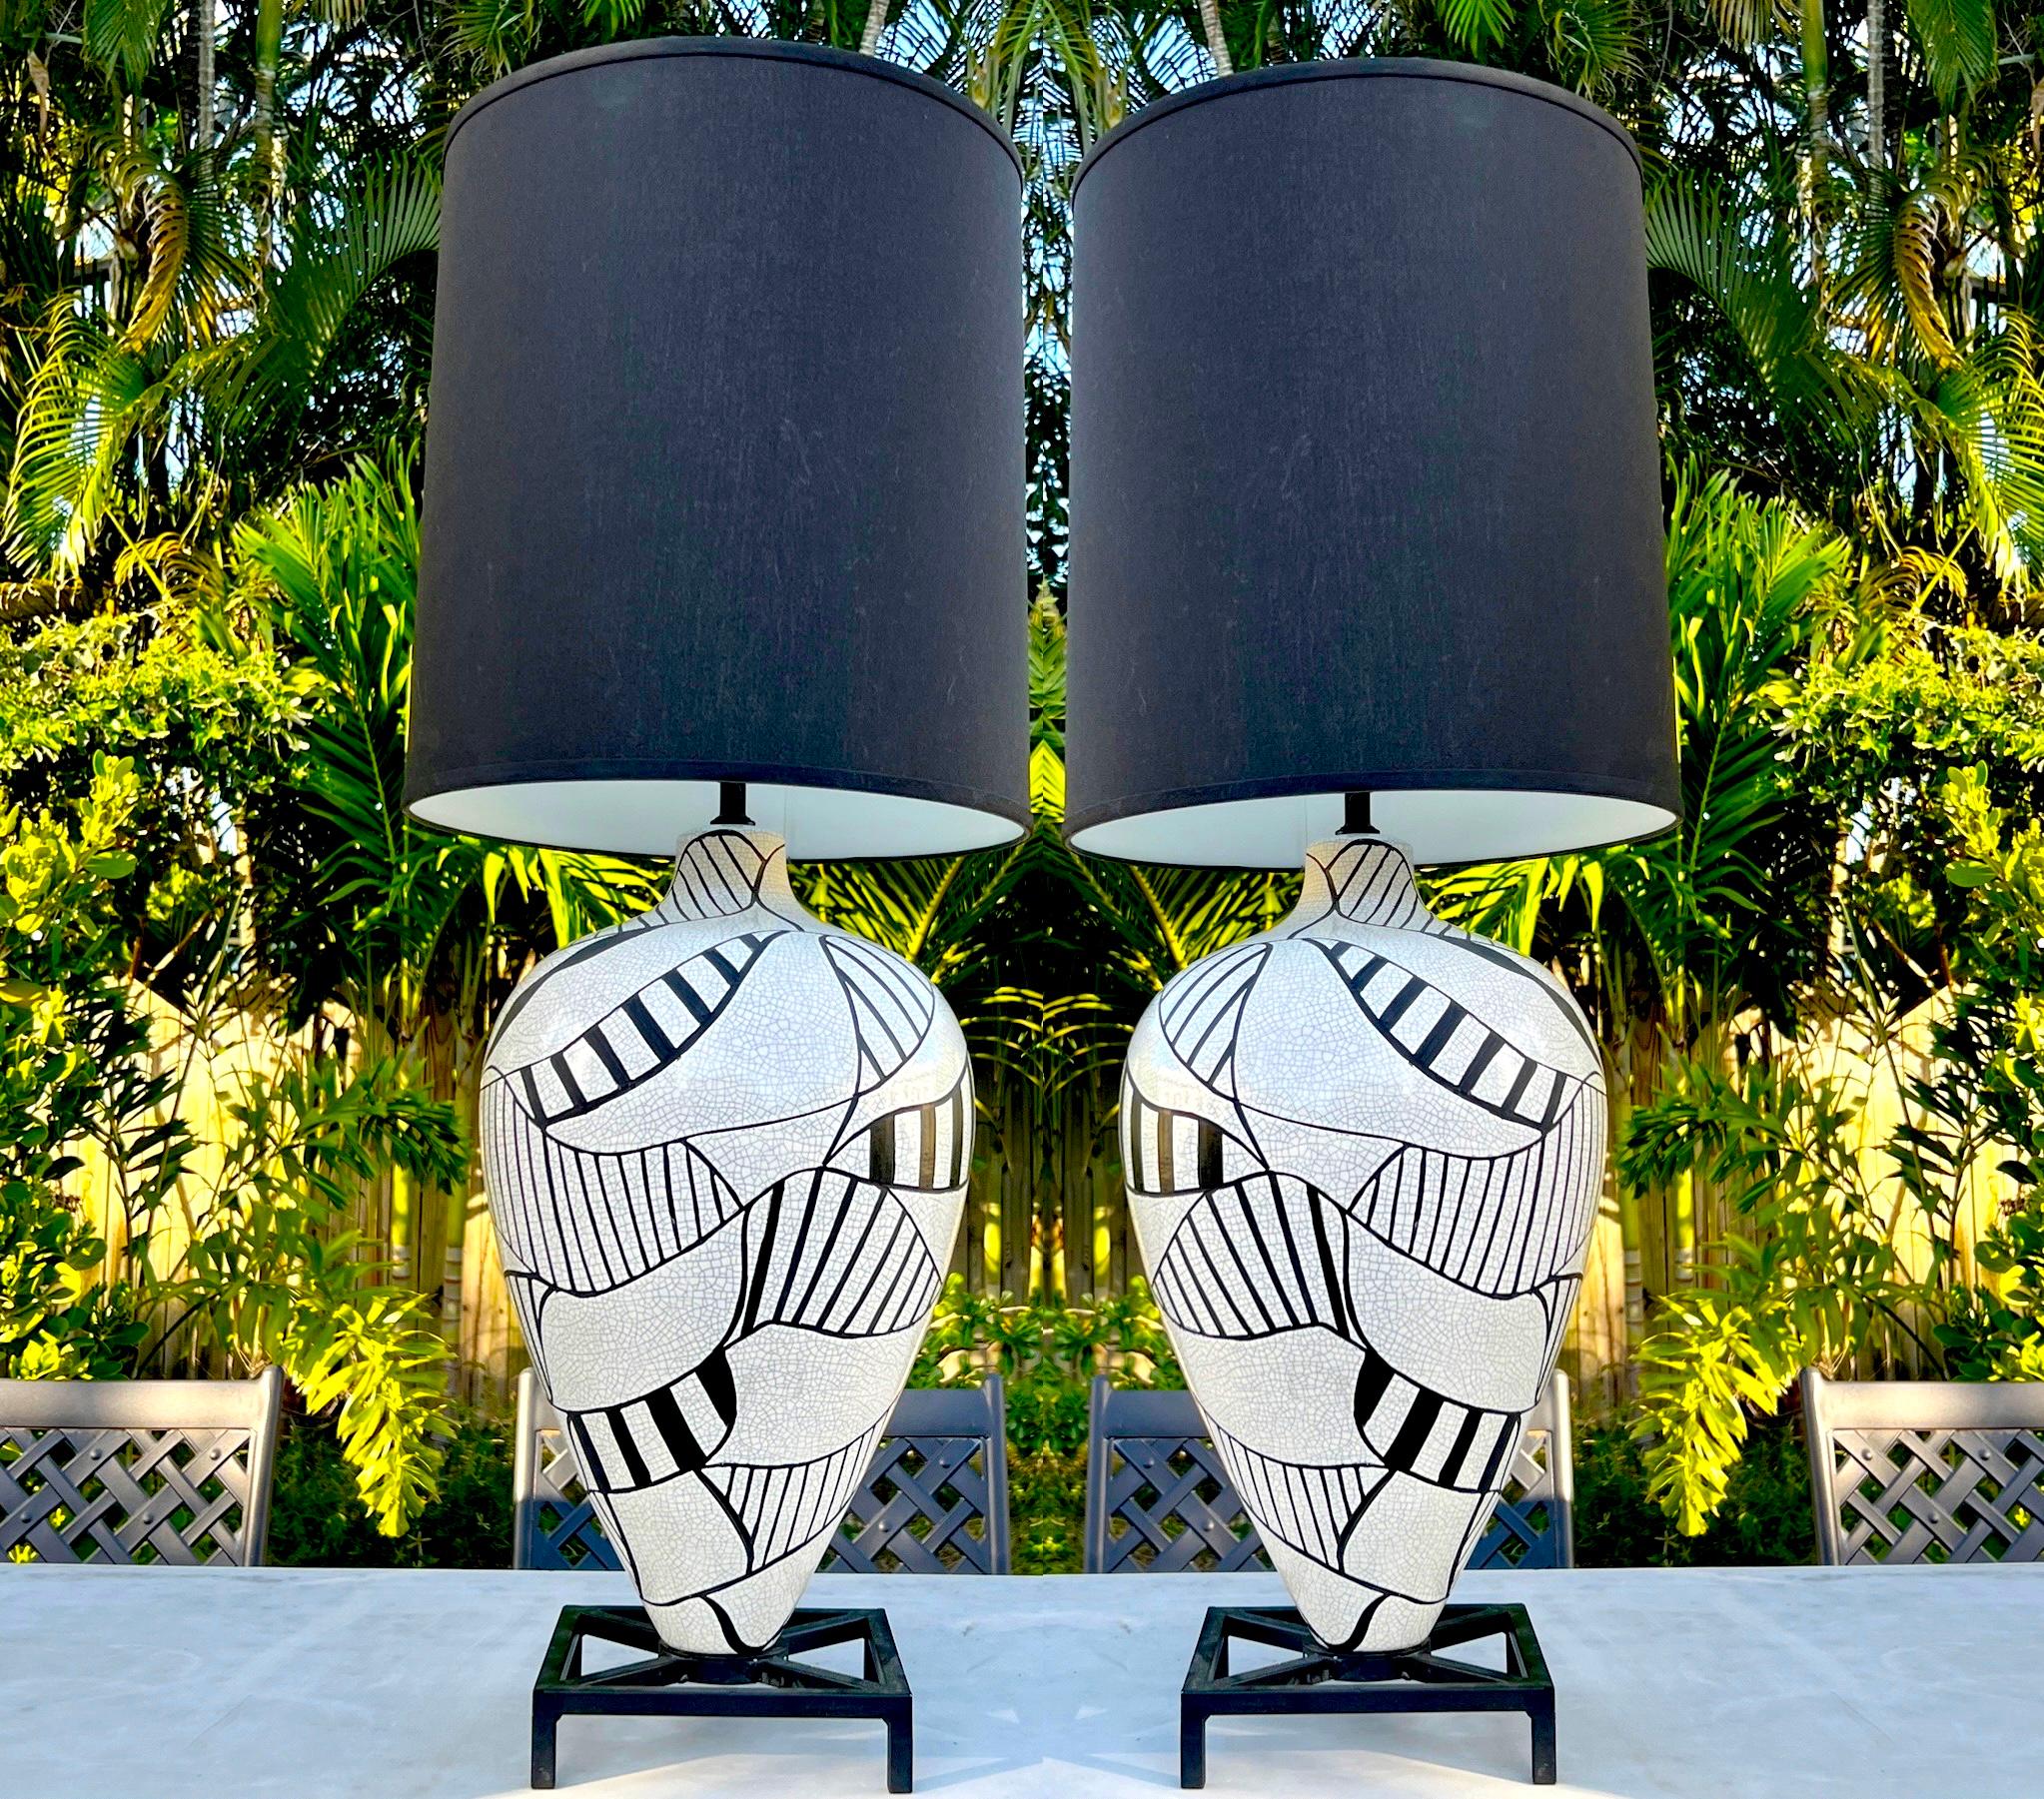 Pair of ceramic pottery lamps with large-scale urn forms featuring a white crackle glaze finish with hand-painted geometric designs in black enamel. The vintage lamps sit on footed iron bases in black. The lamps have a mid-century modern design